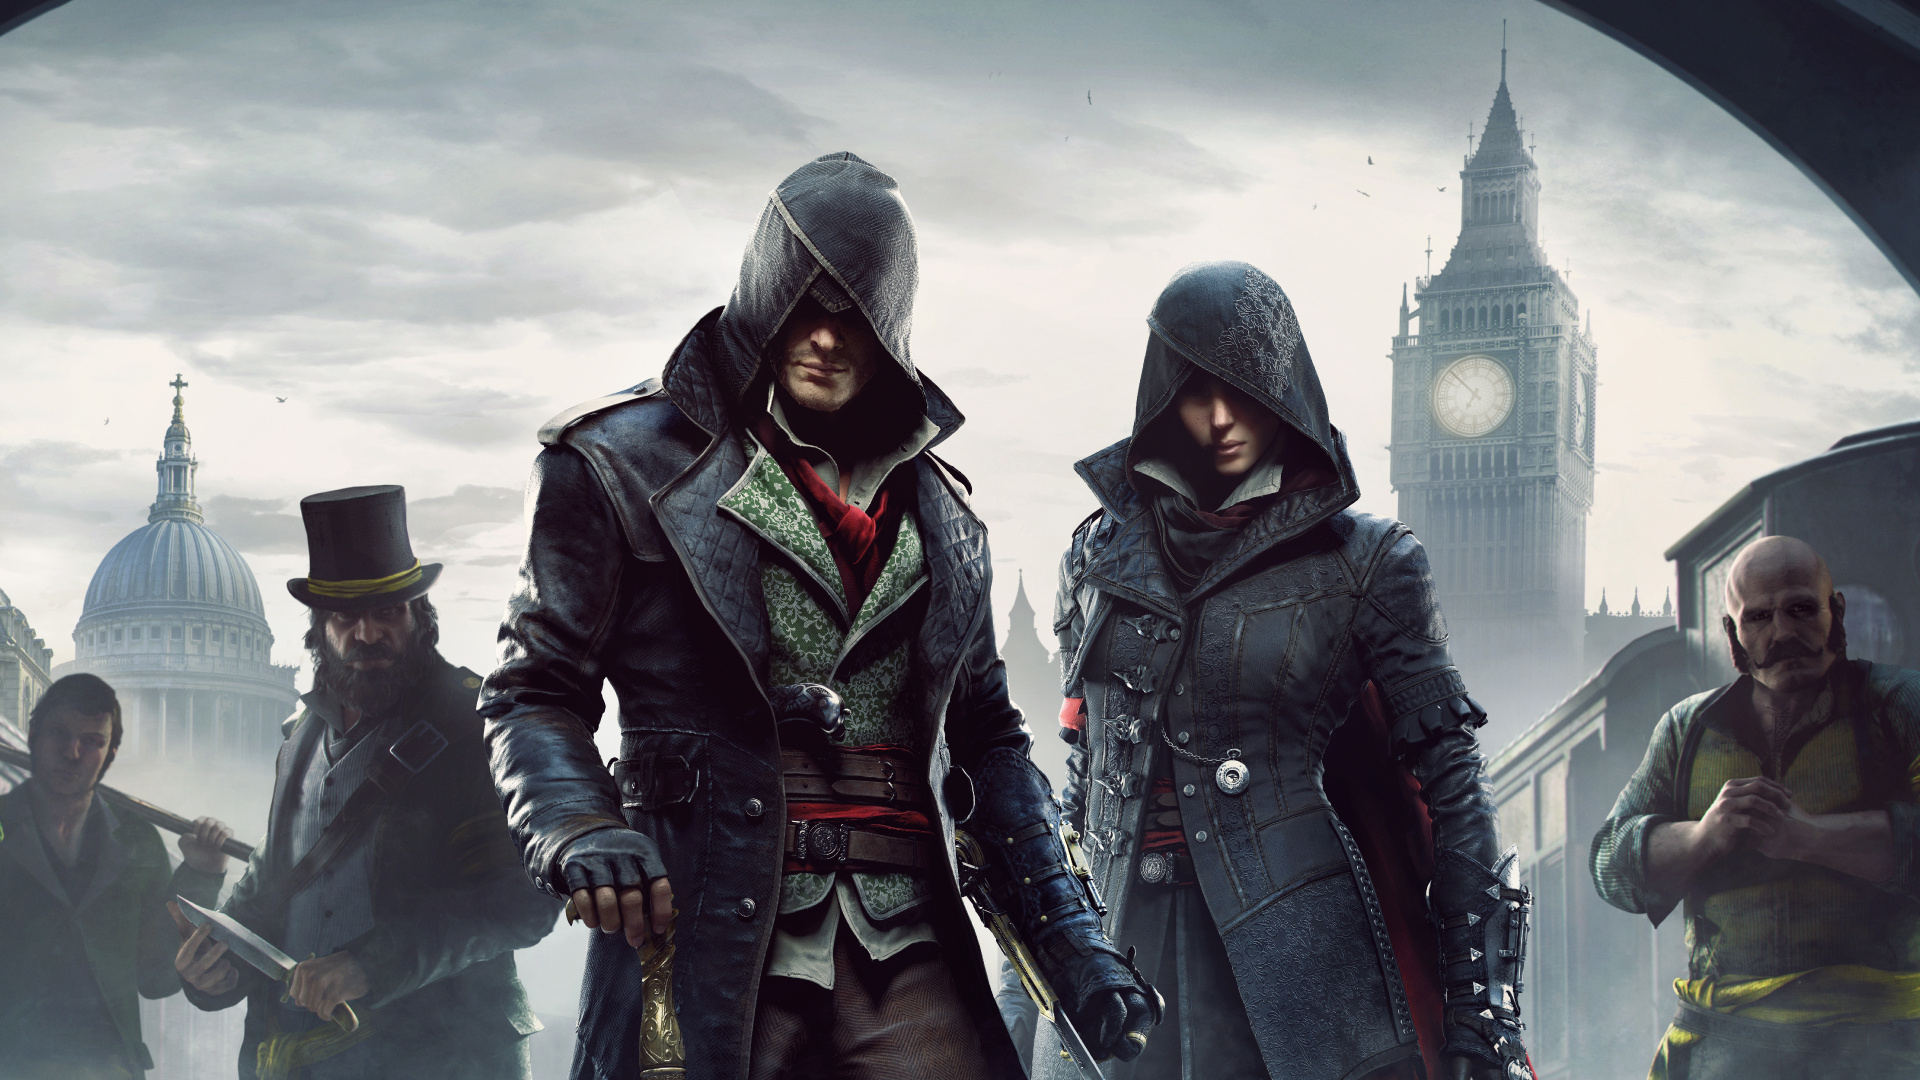 Assassins Creed Syndicate, Ubisoft, Pc-Spiel, Film, Assassins Creed Unity. Wallpaper in 1920x1080 Resolution